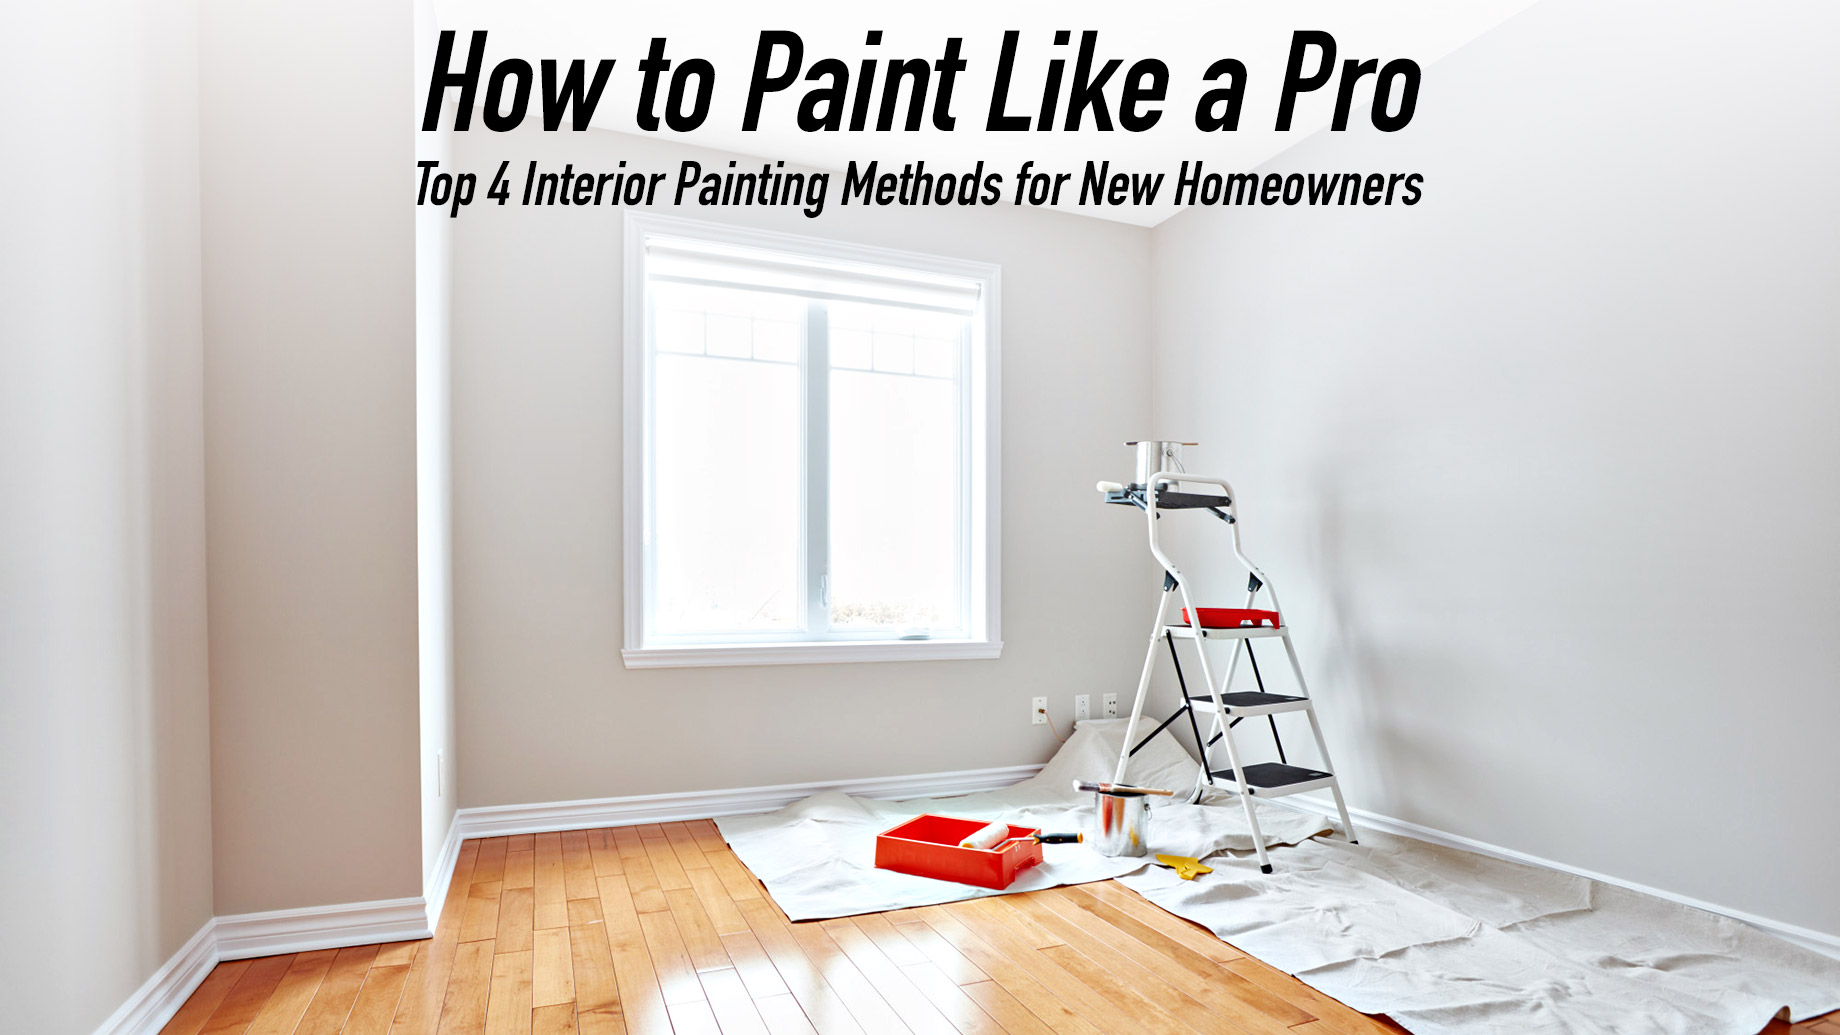 How to Paint Like a Pro - Top 4 Interior Painting Methods for New Homeowners